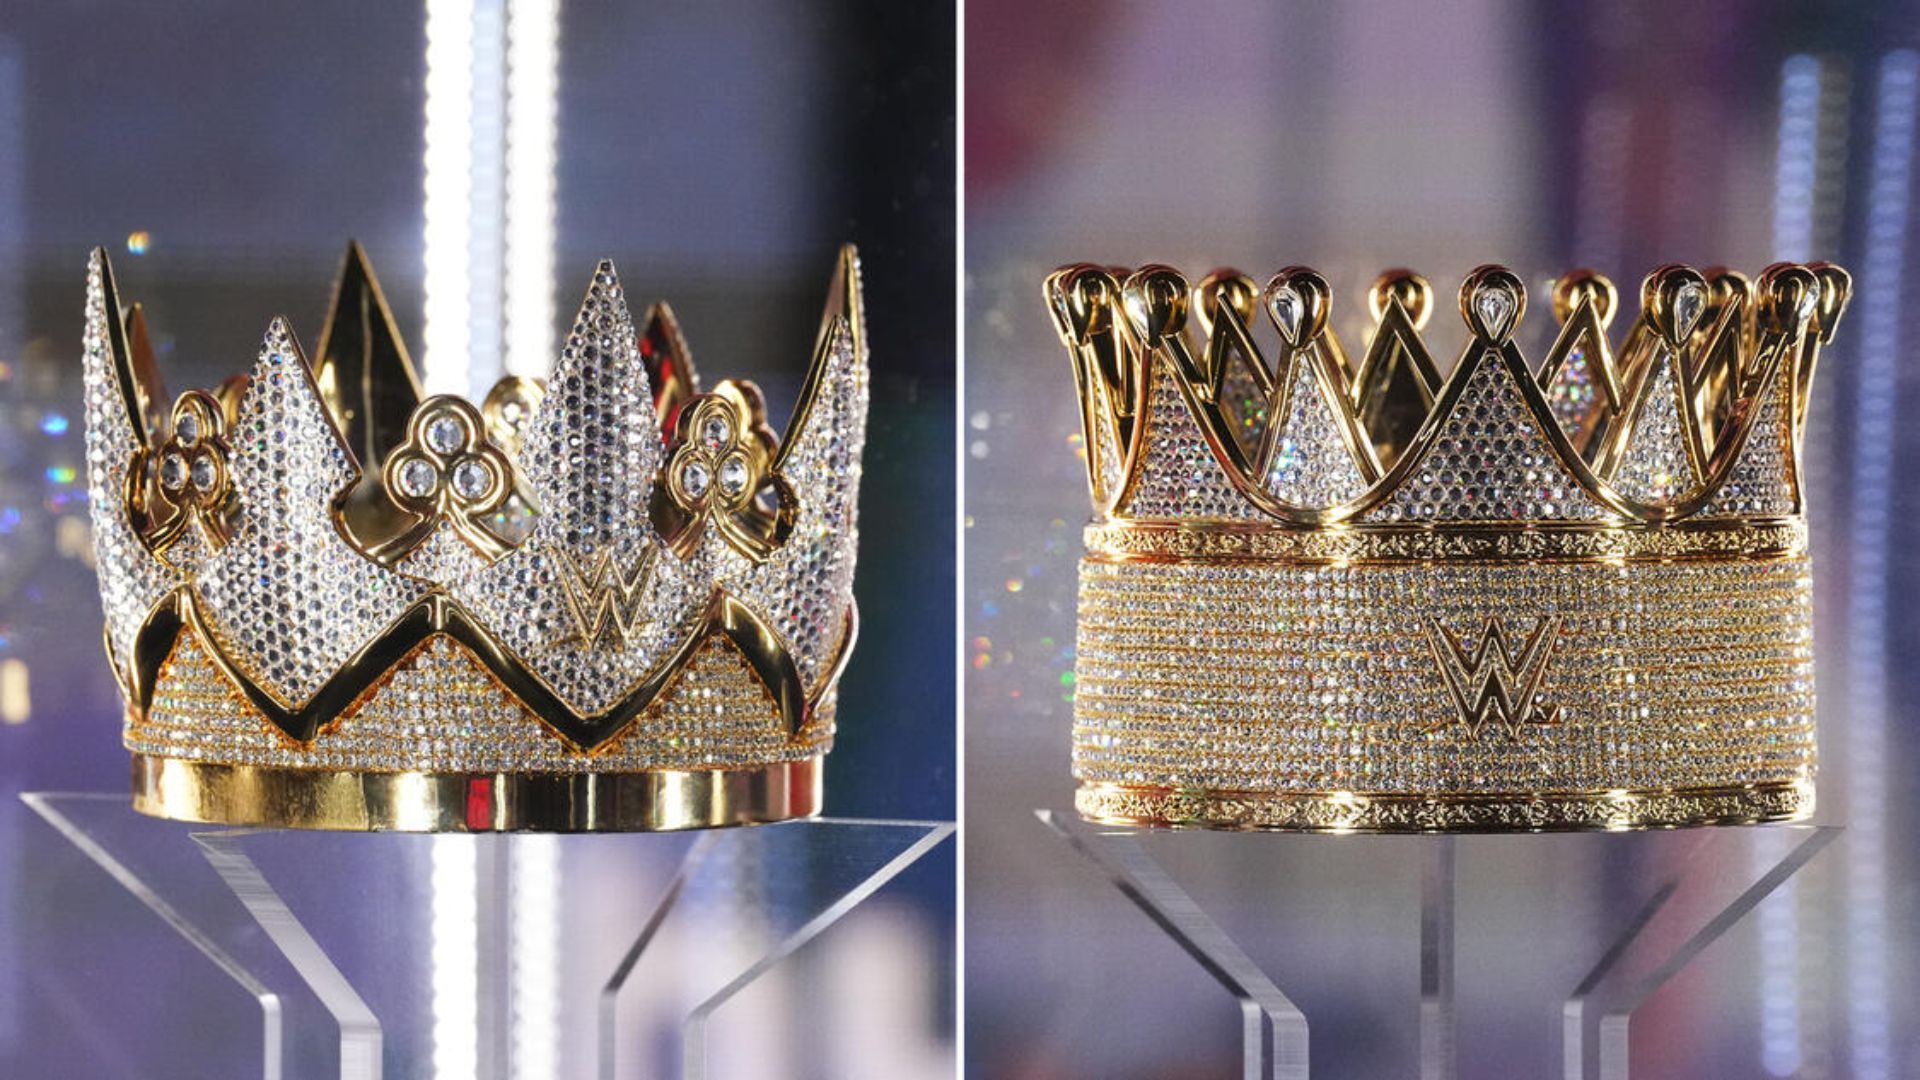 The King and Queen of the Ring PLE will emanate from the Jeddah Super Dome in Saudi Arabia (Image credit: WWE)